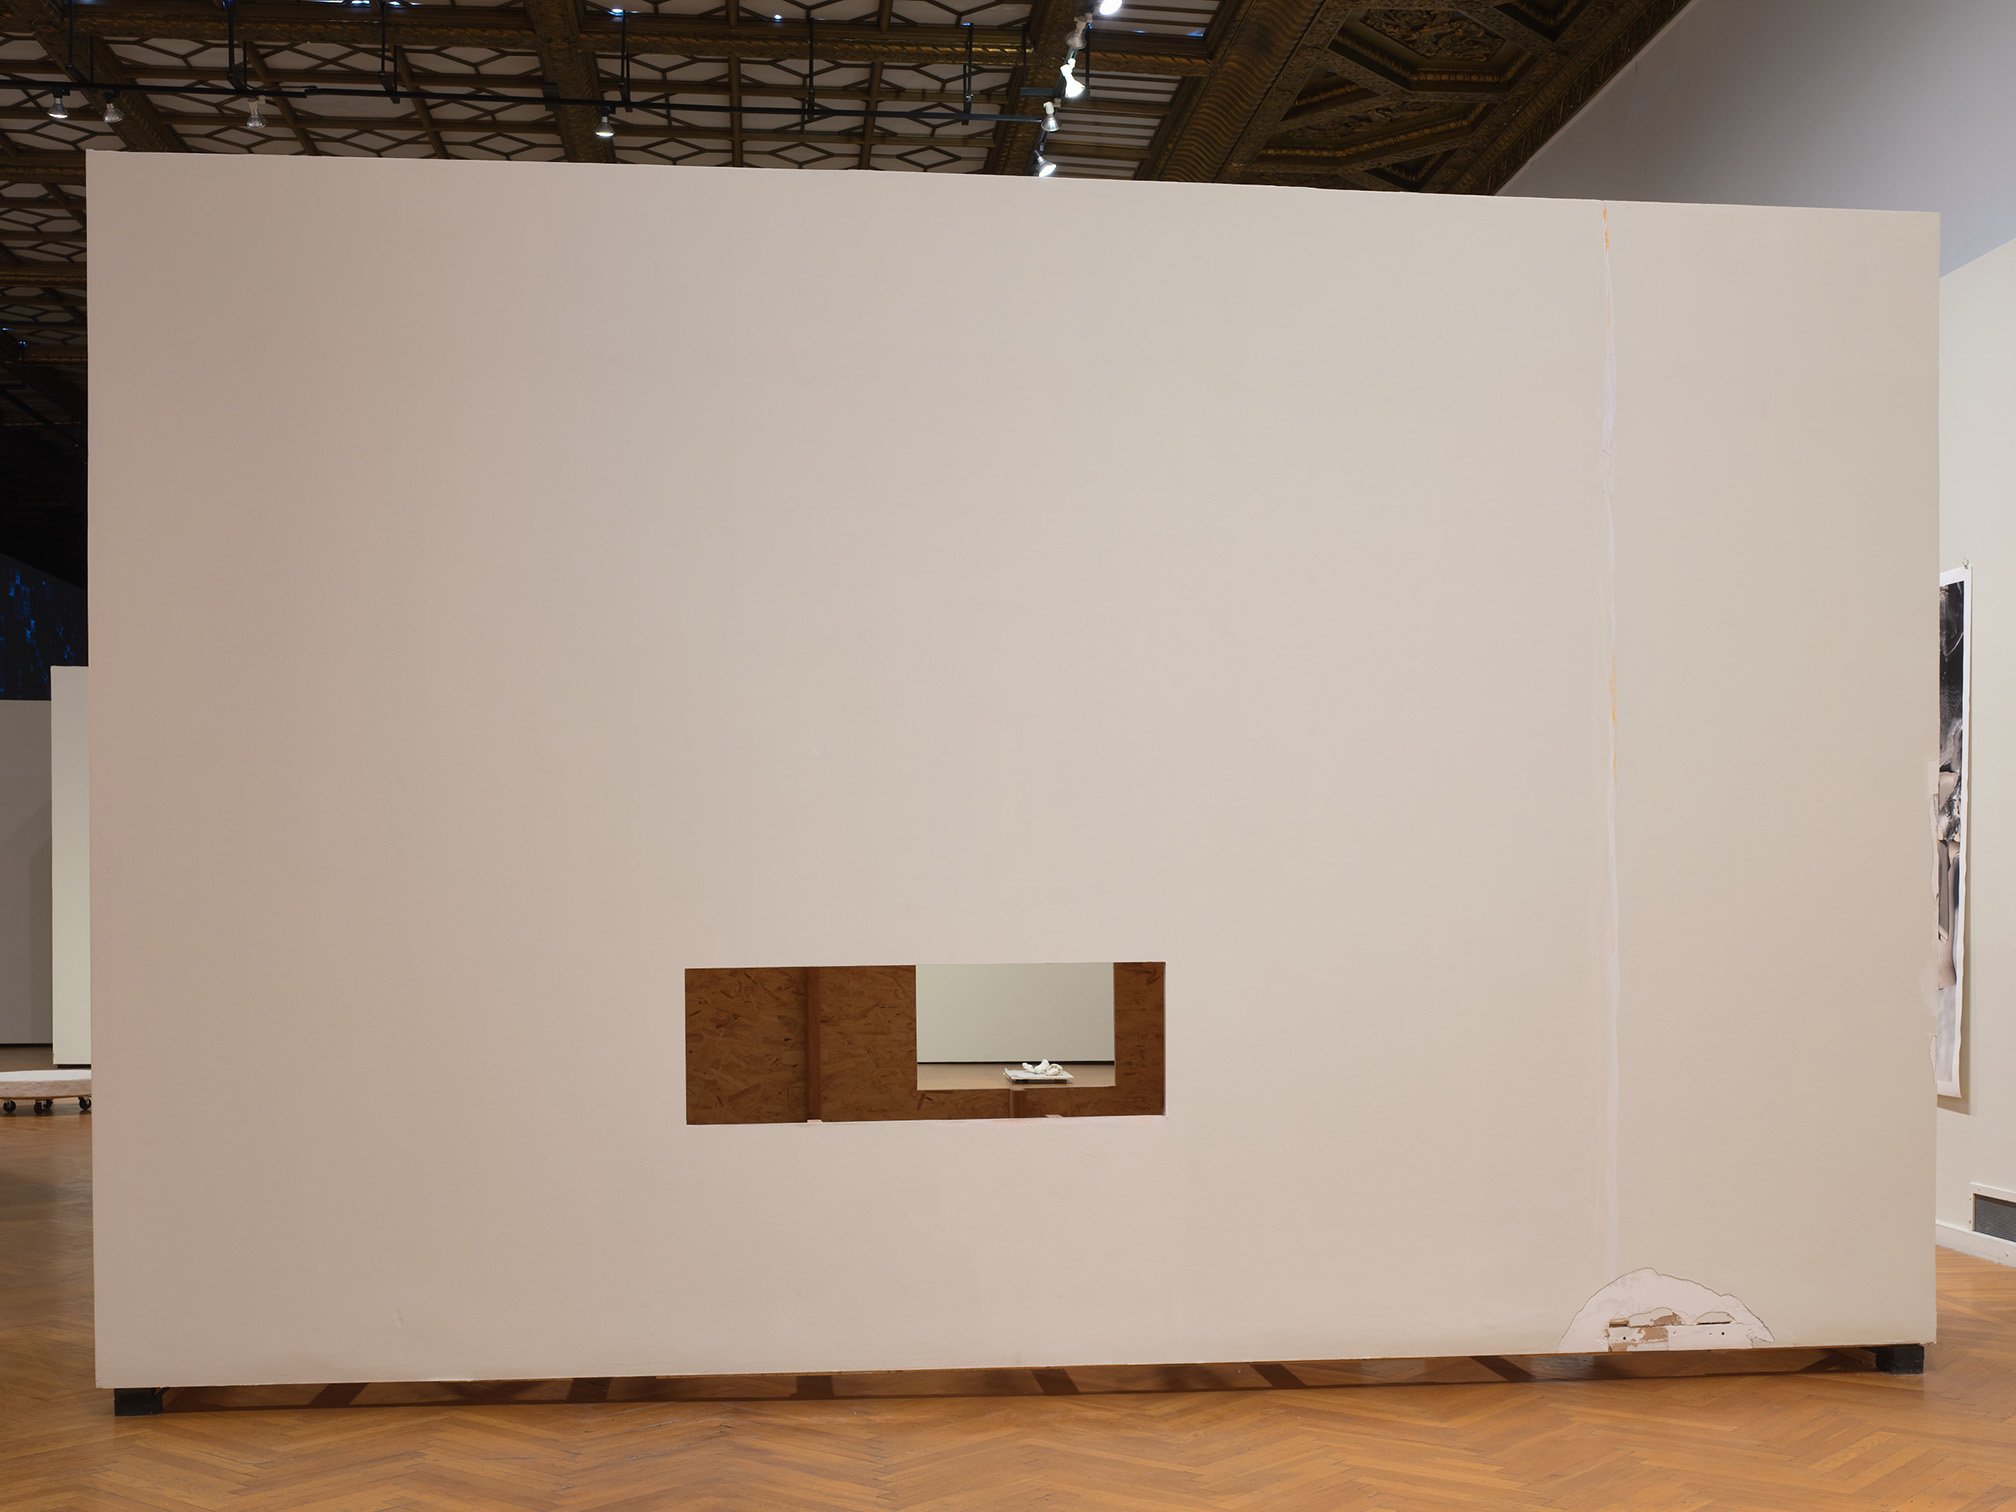   Into The Matter , installation view, 2018, altered moveable museum wall, sheetrock joint compound, latex paint, lumber, OSB sheathing,  127 x 168 x 36 inches.   